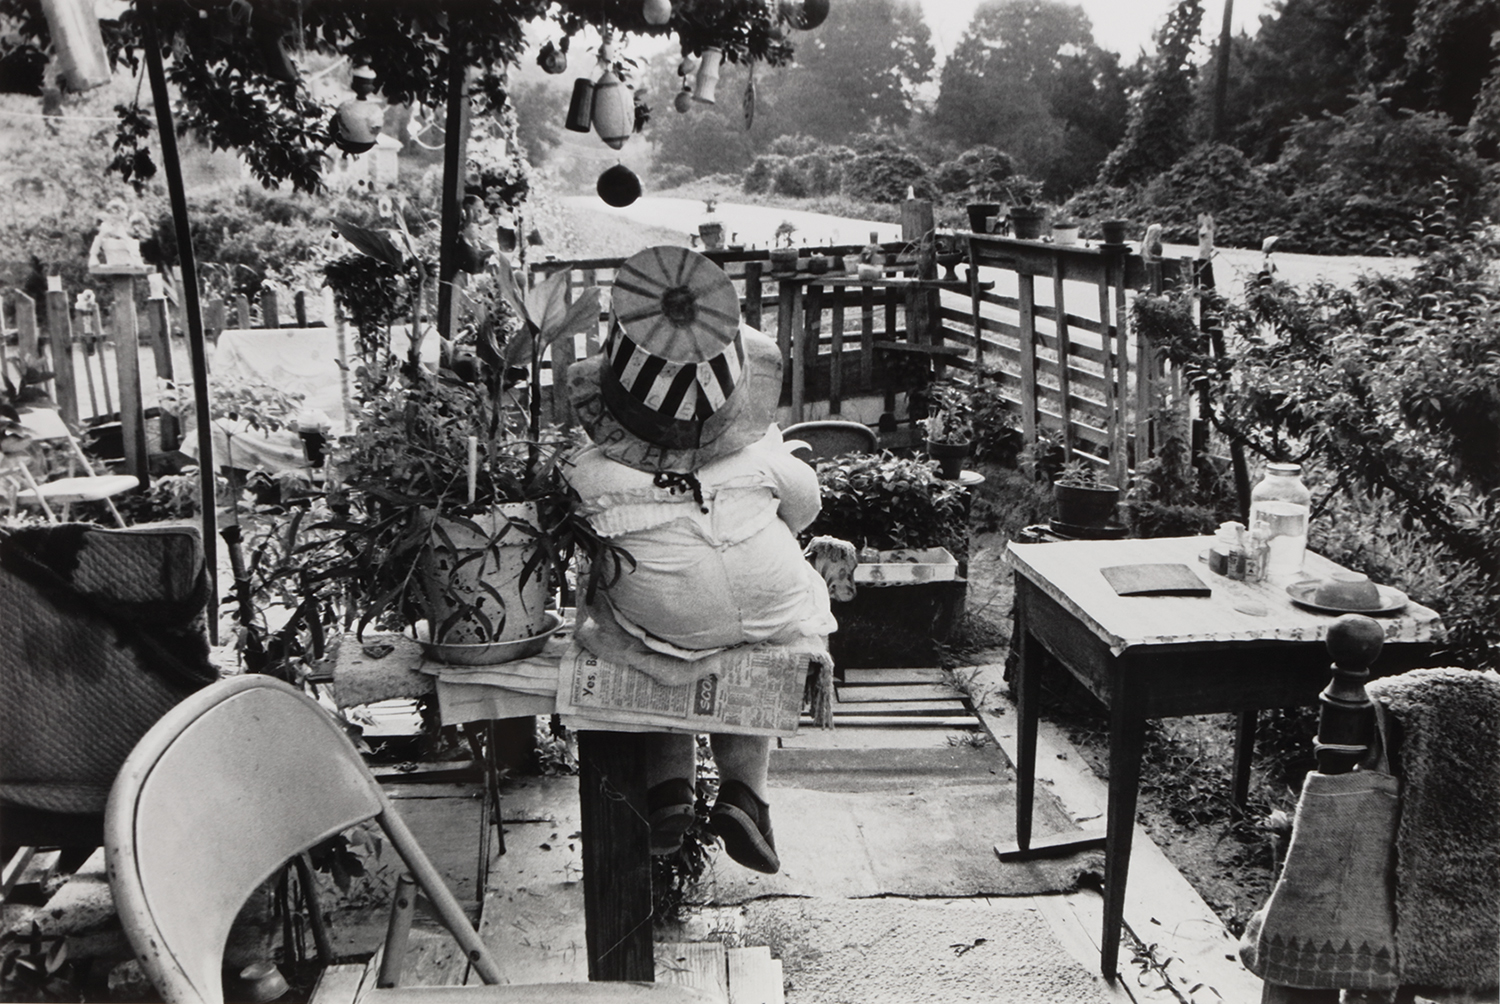 A large clothed doll, wearing a striped top hat and shoes, sits on a bench next to a potted plant with its back facing the camera in the courtyard of Nellie Mae Rowe's garden in this black and white photo. The courtyard is full of mismatched chairs and a table, and a variety of ornaments hang from the tree branches above the doll's head. The doll faces the yard's wooden fence which is topped with potted plants. Beyond the fence, a two-lane road runs in front of the yard, beyond which is a landscape covered with kudzu vines.